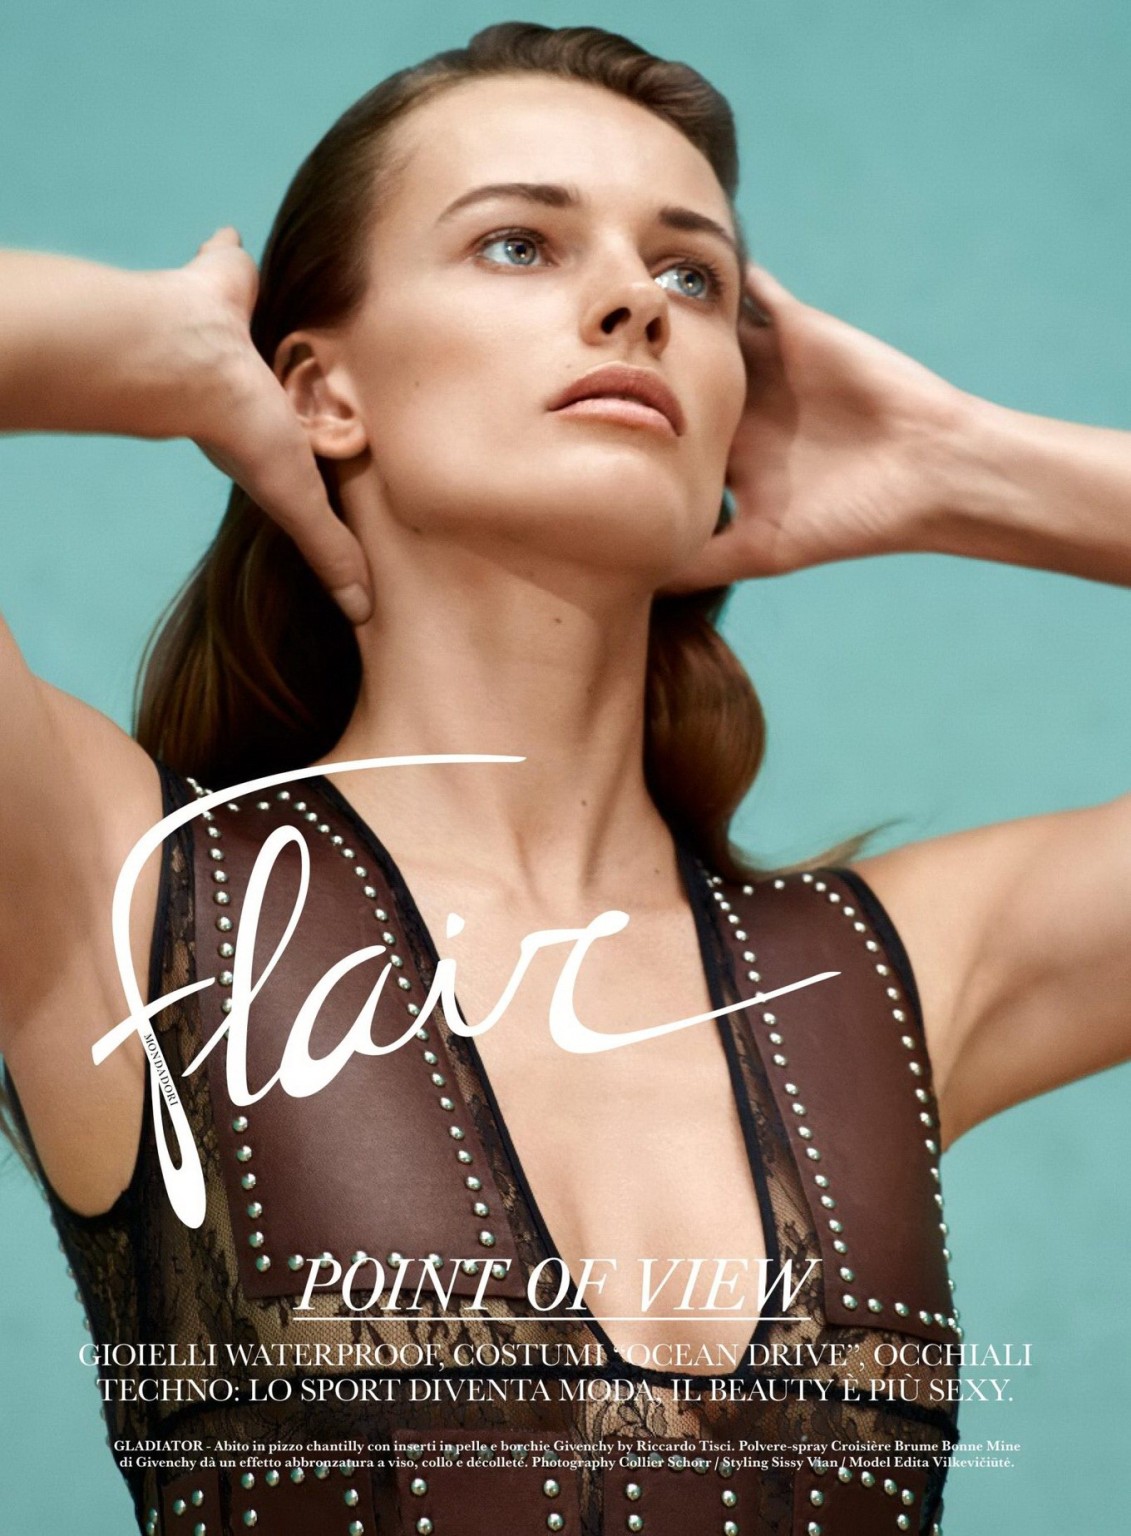 Edita Vilkeviciute showing off her big boobs in Flair Magazine Italy May 2015 is #75164955